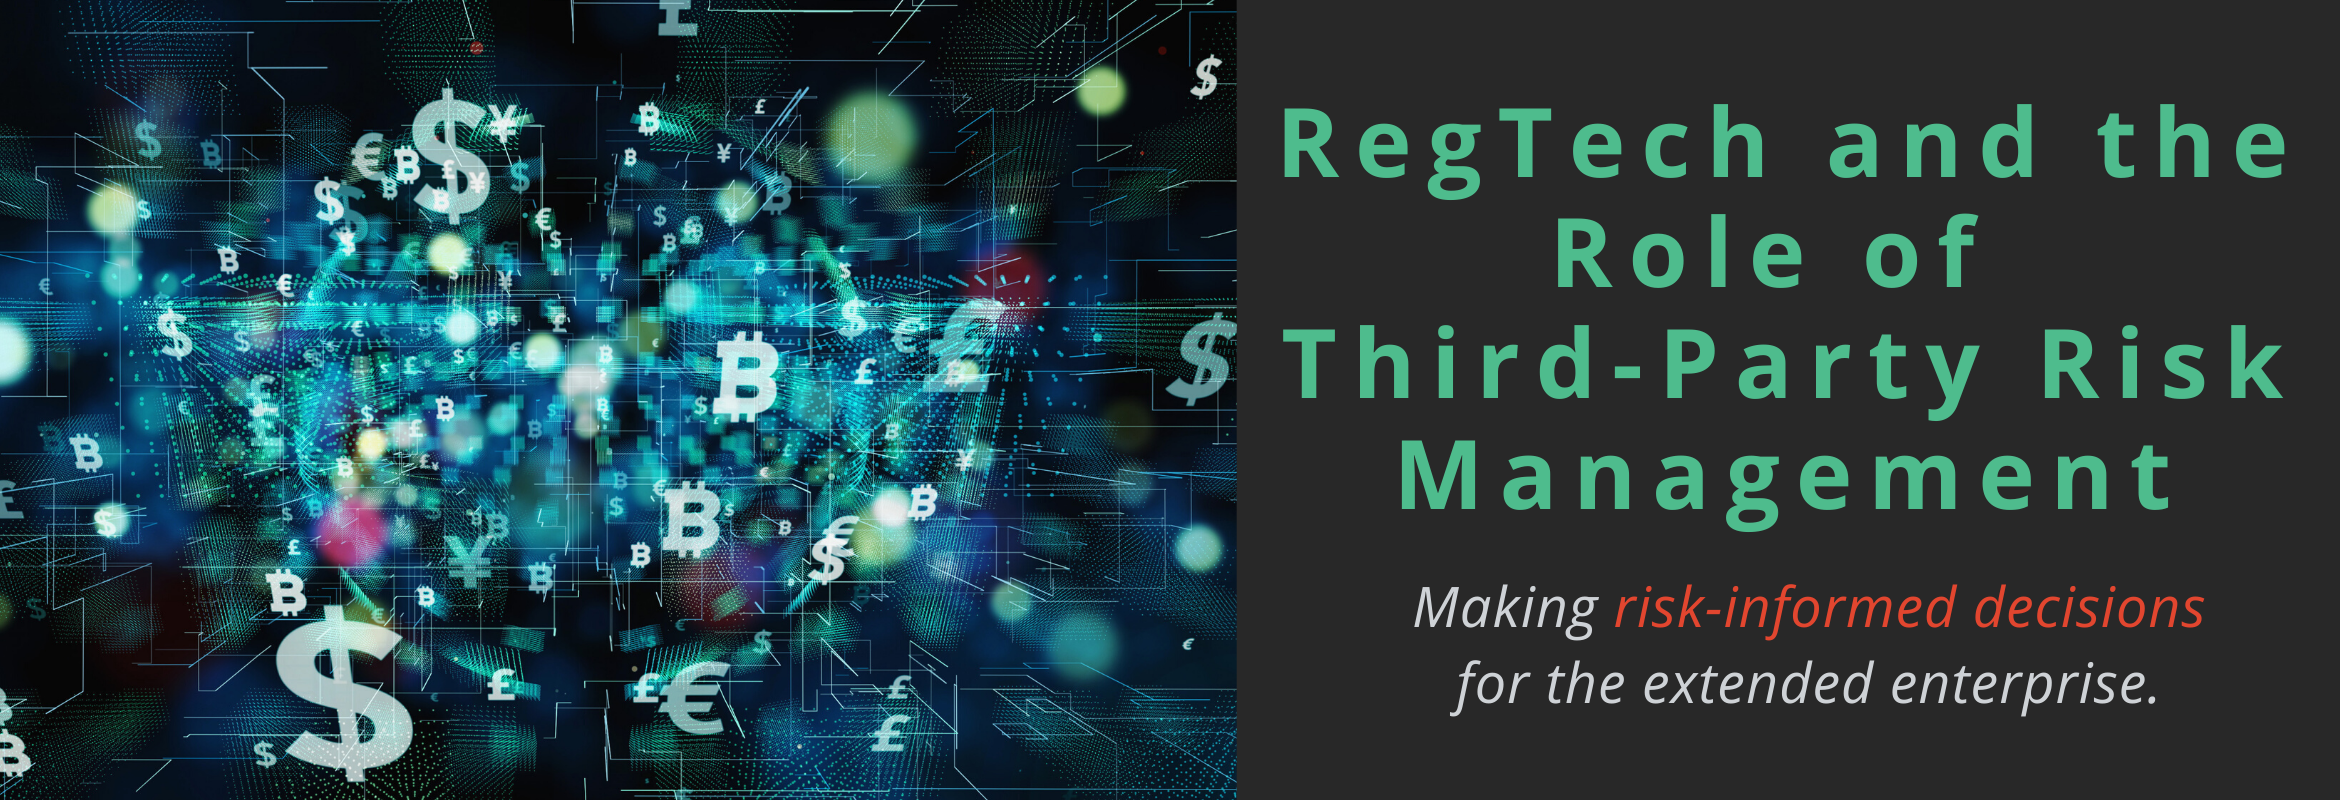 As risk and compliance management professionals look to RegTech companies to assist with their legal, regulatory and compliance mandate, it’s important to have a solid third-party risk management program in place to make risk-informed decisions for the extended enterprise.